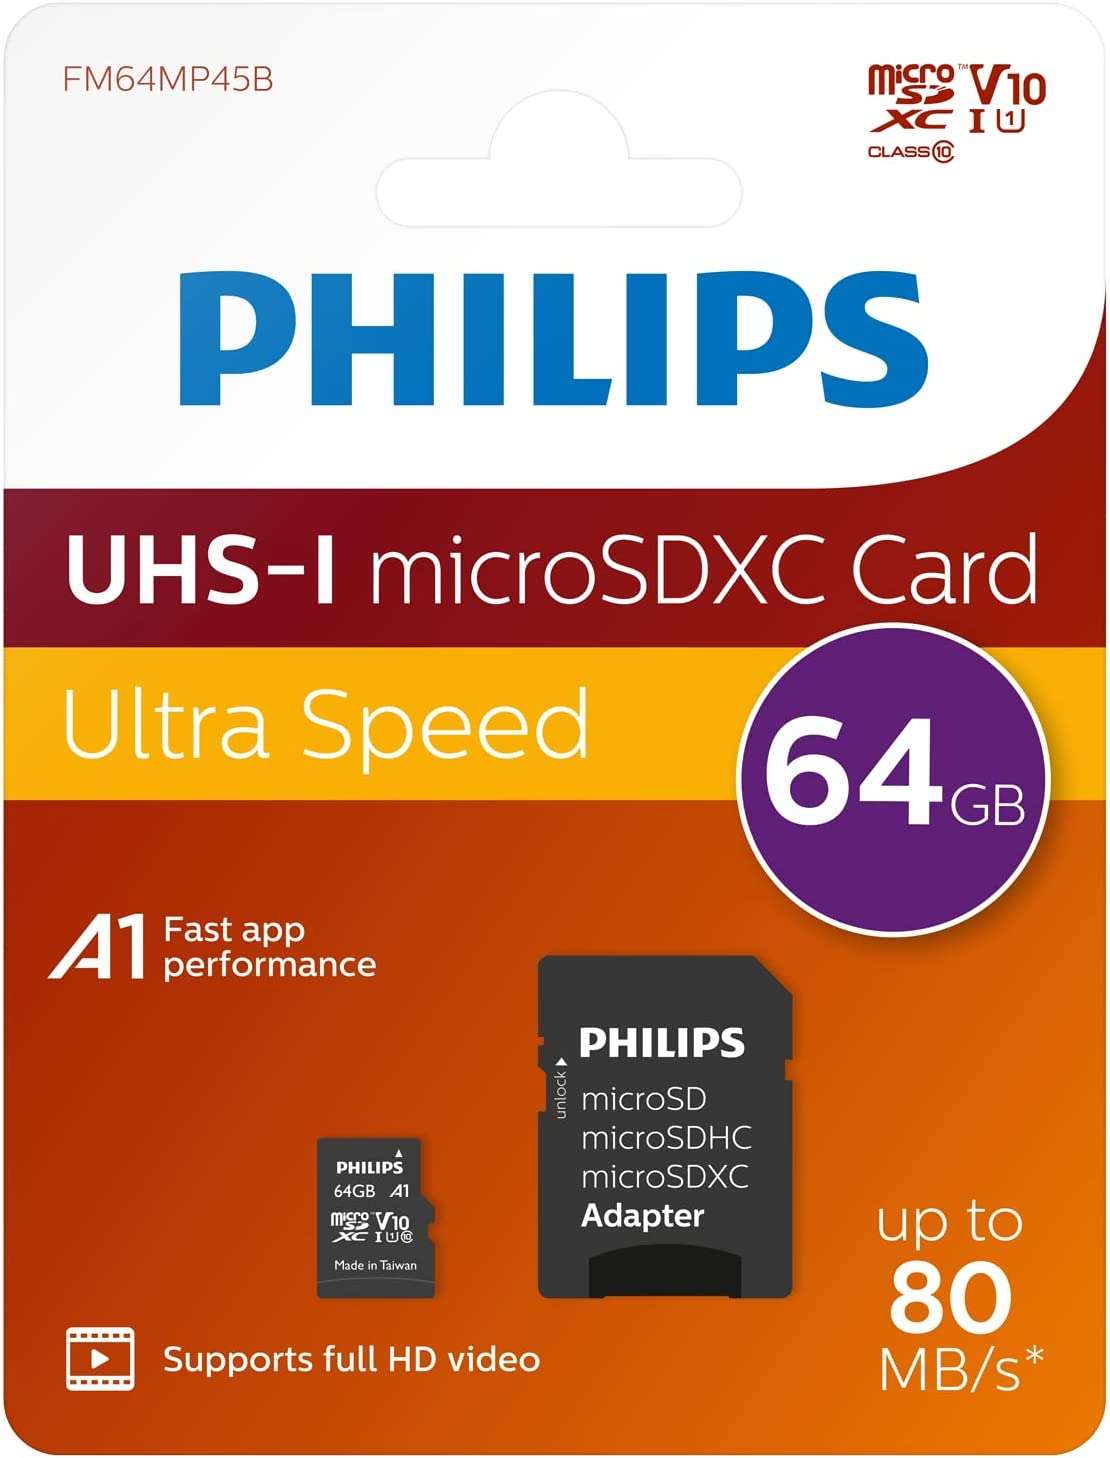 Philips - Micro SDHC 64 GB Memory Card - Zhivago Gifts